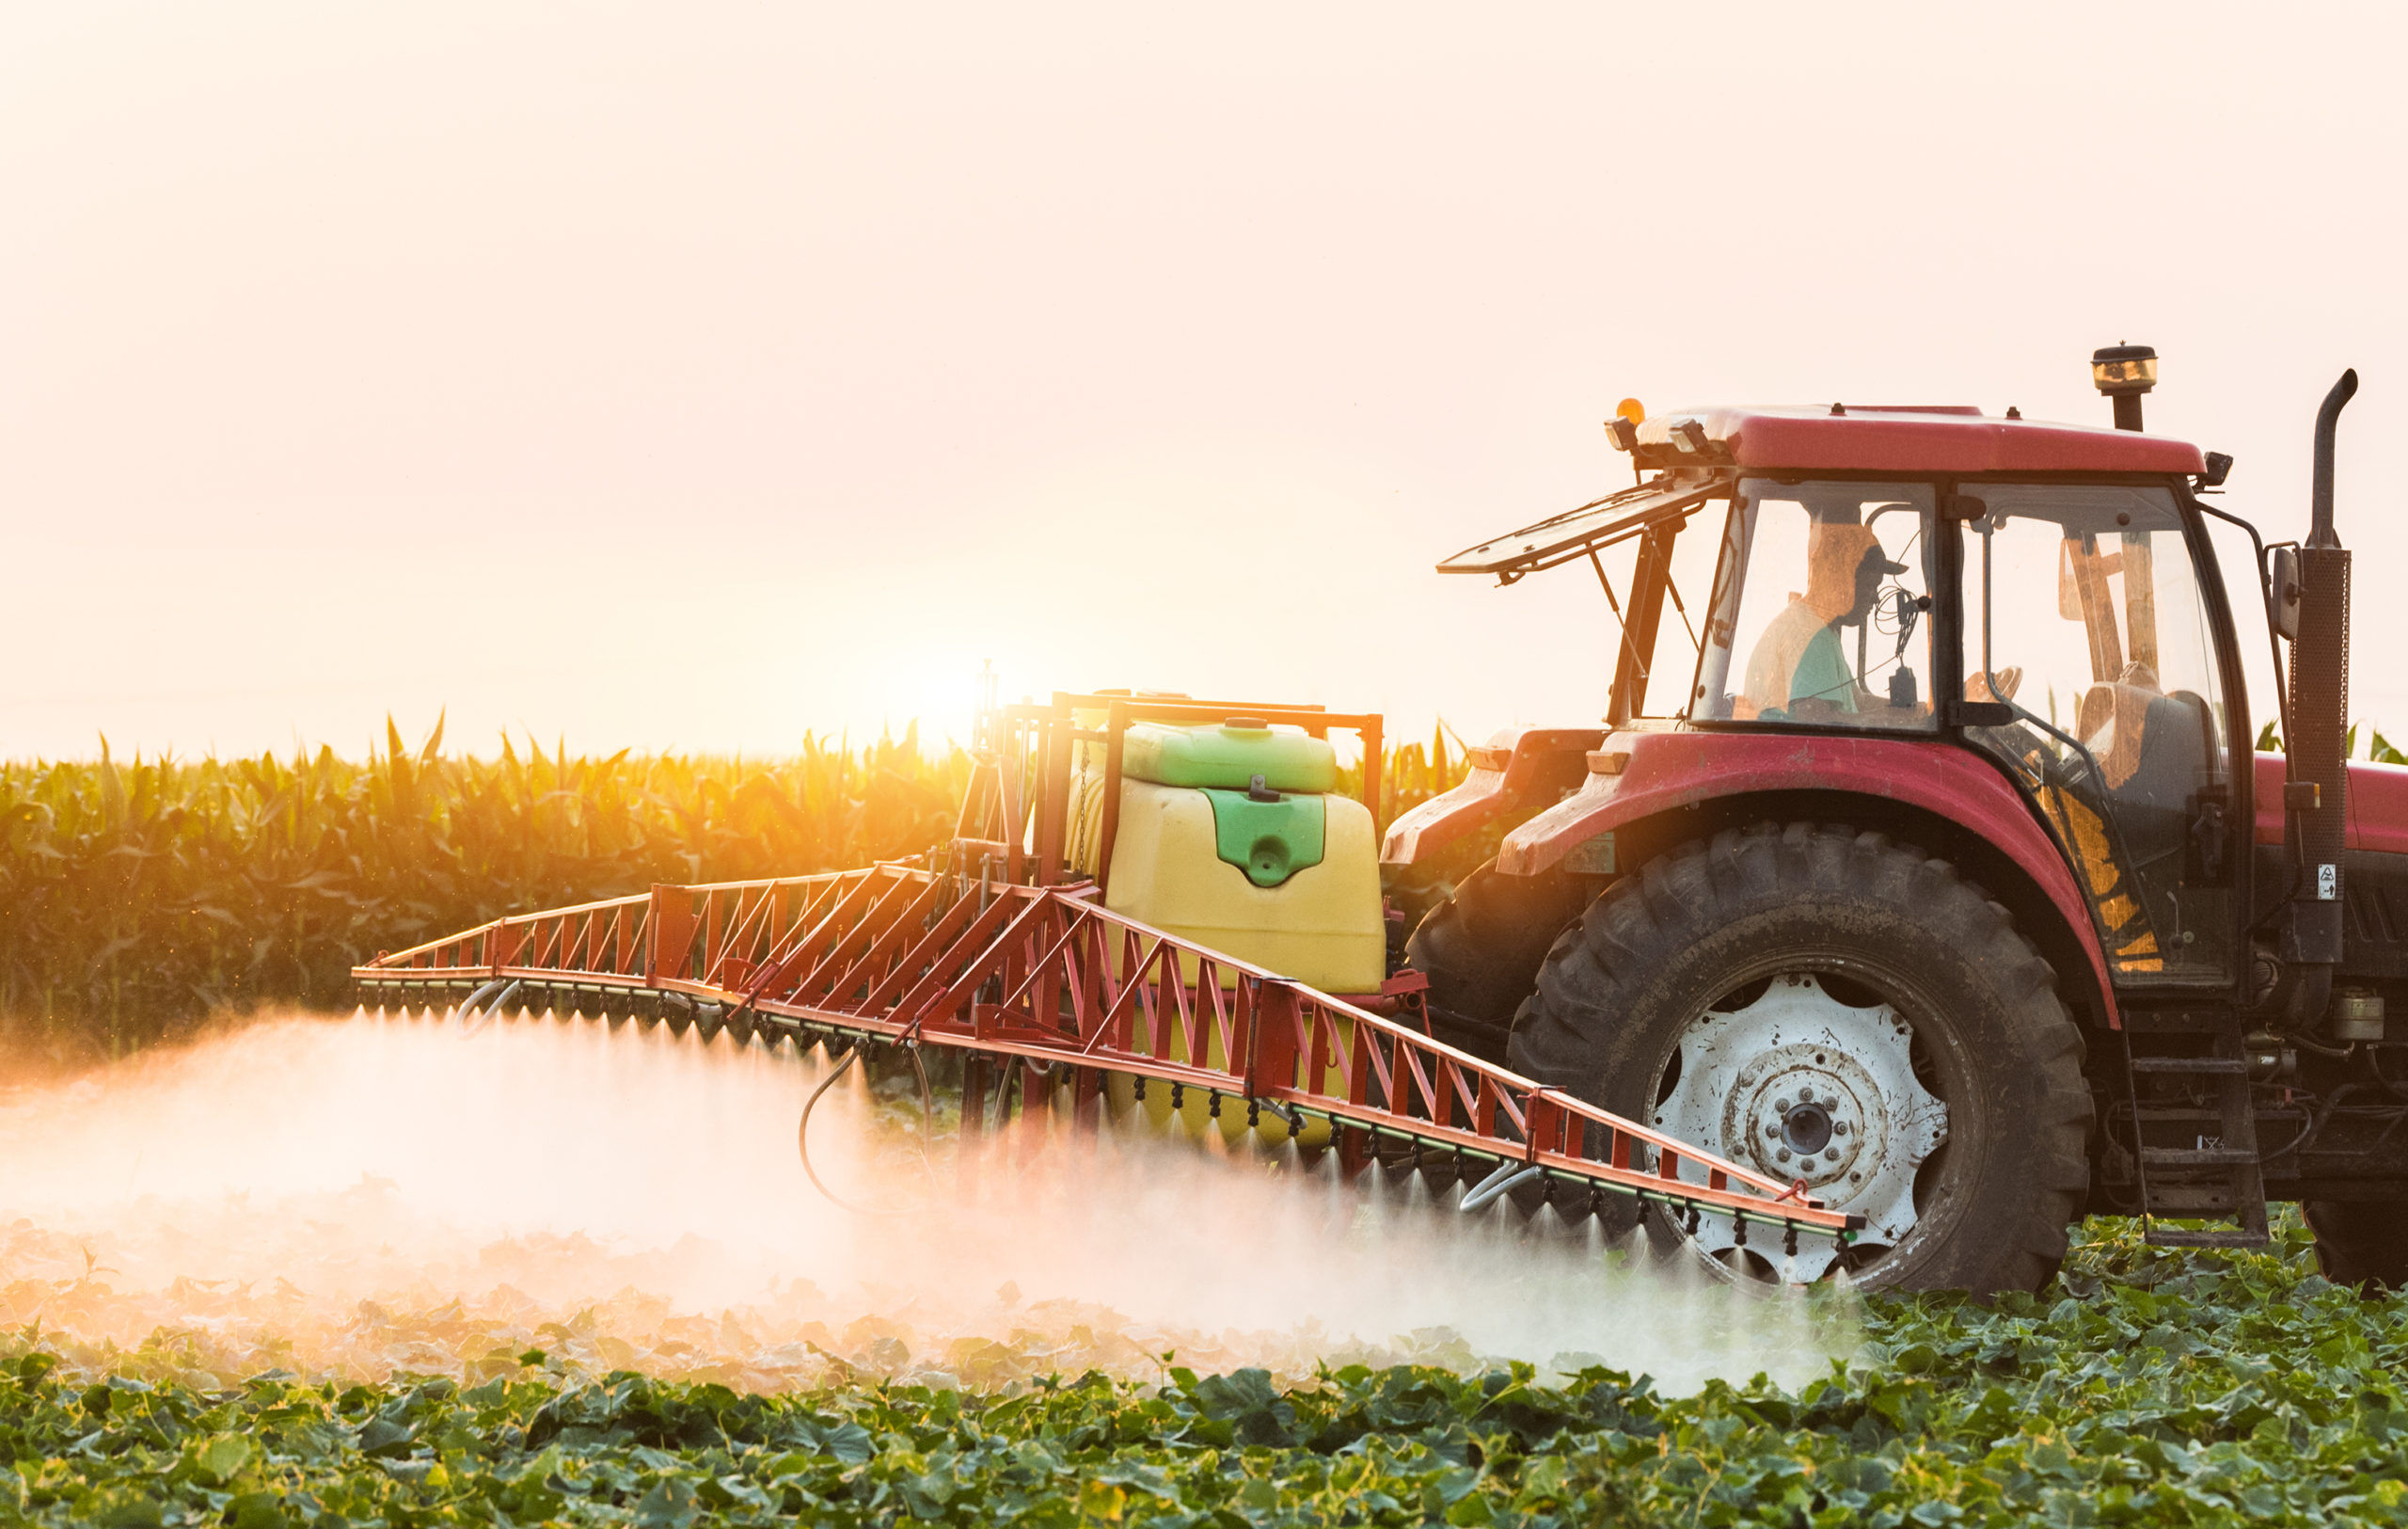 Tractor spraying pesticides on field with sprayer